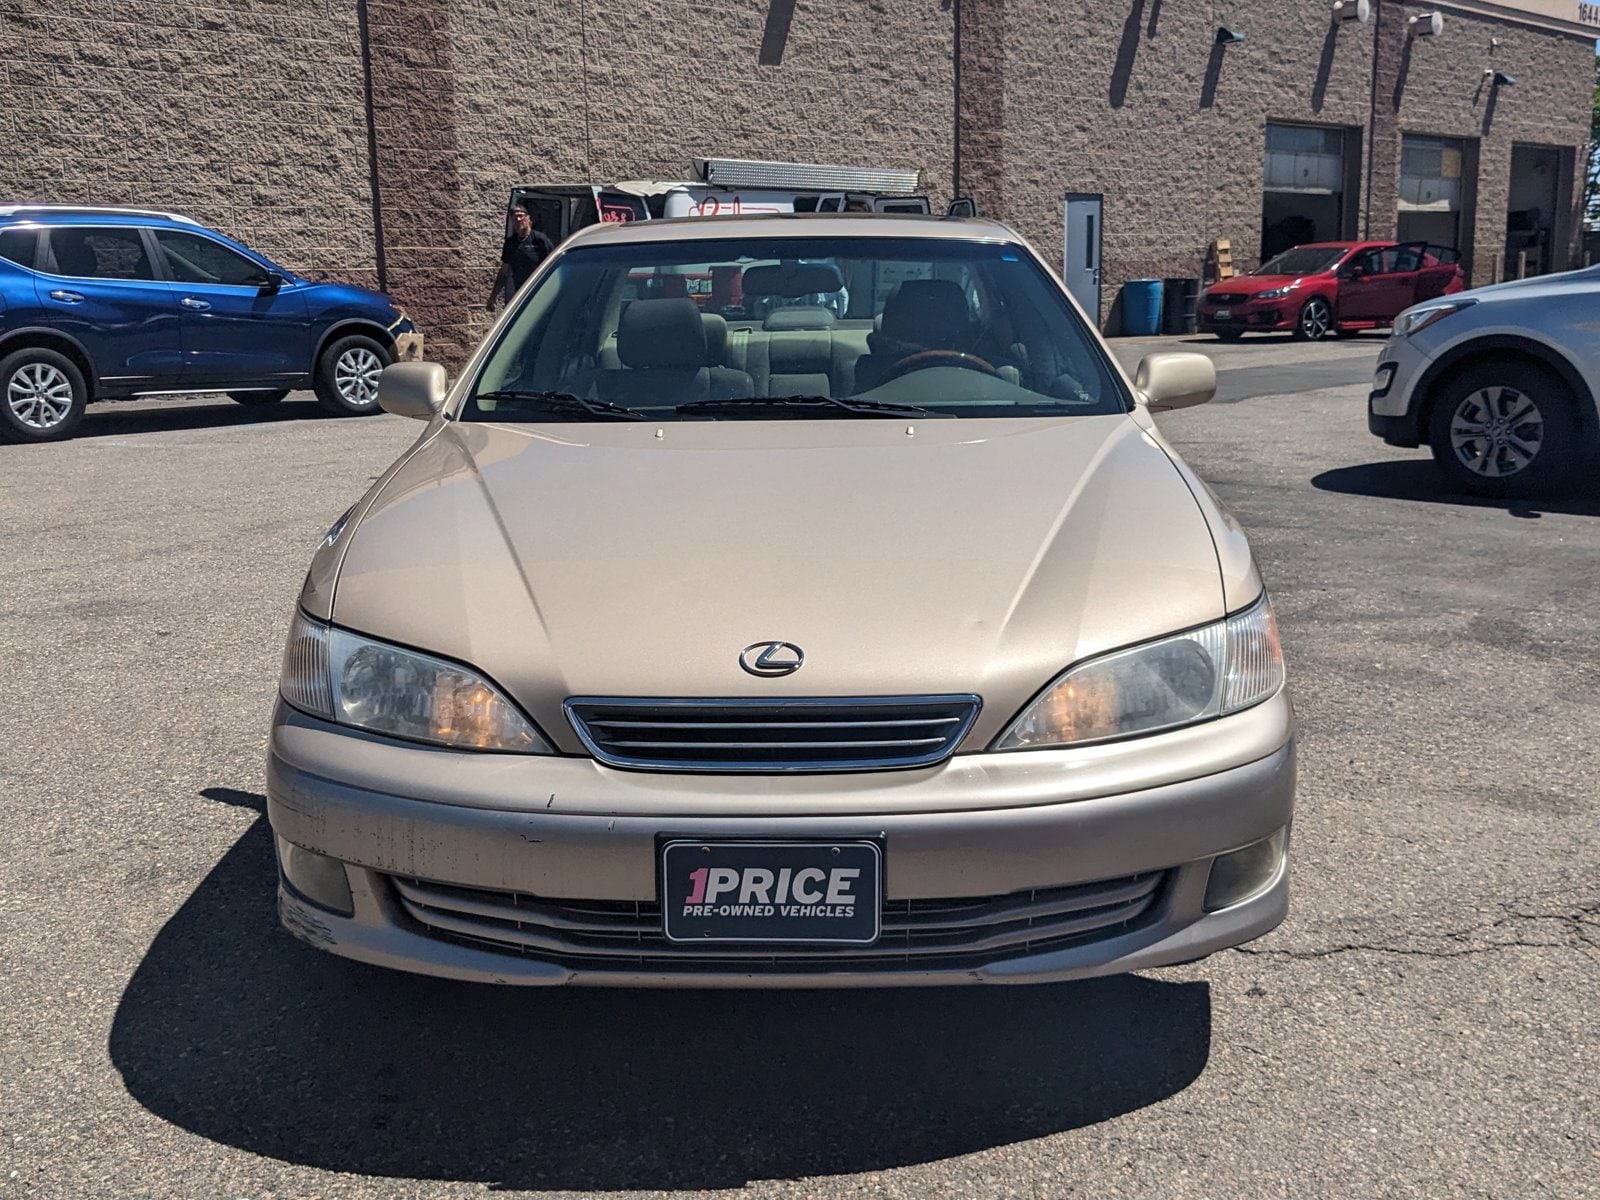 Used 2001 Lexus ES 300 with VIN JT8BF28G210331103 for sale in Golden, CO